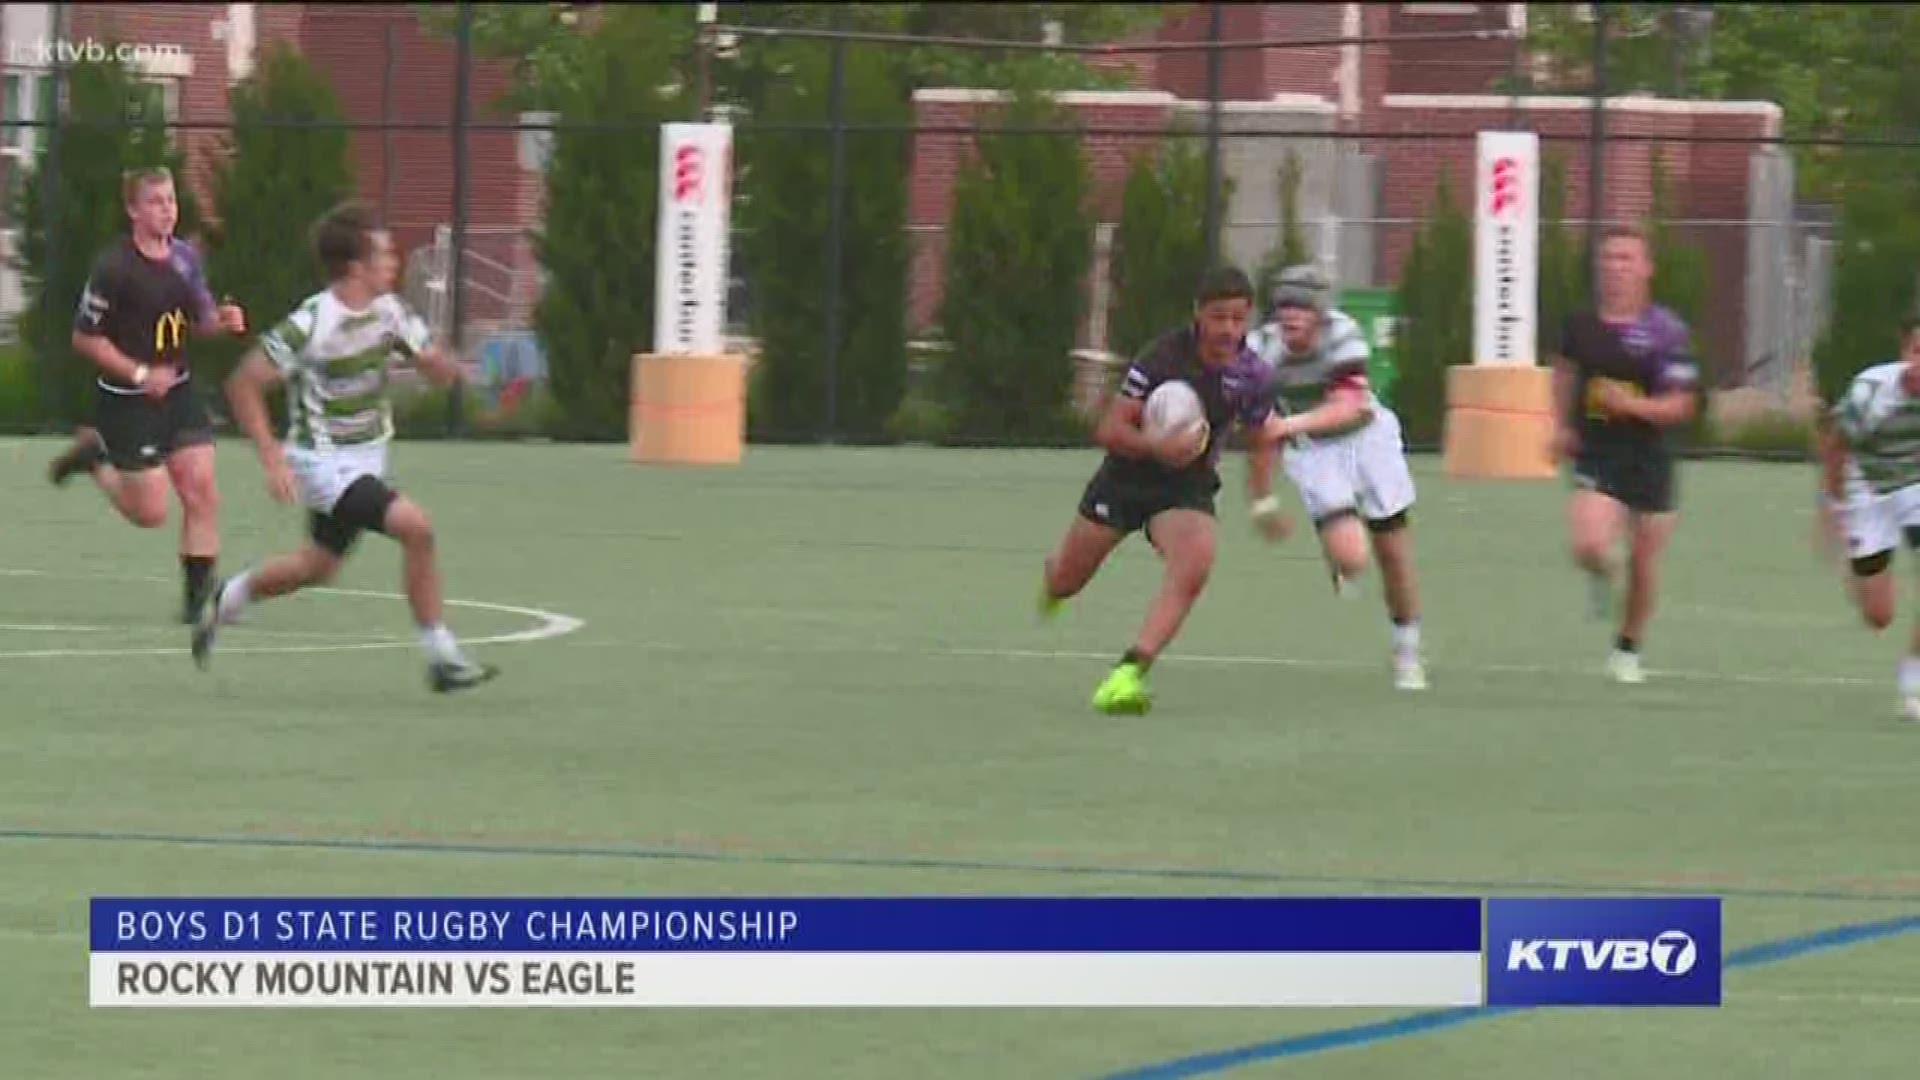 Eagle vs. Rocky Mountain boys state championship rugby highlights 5/19/2018